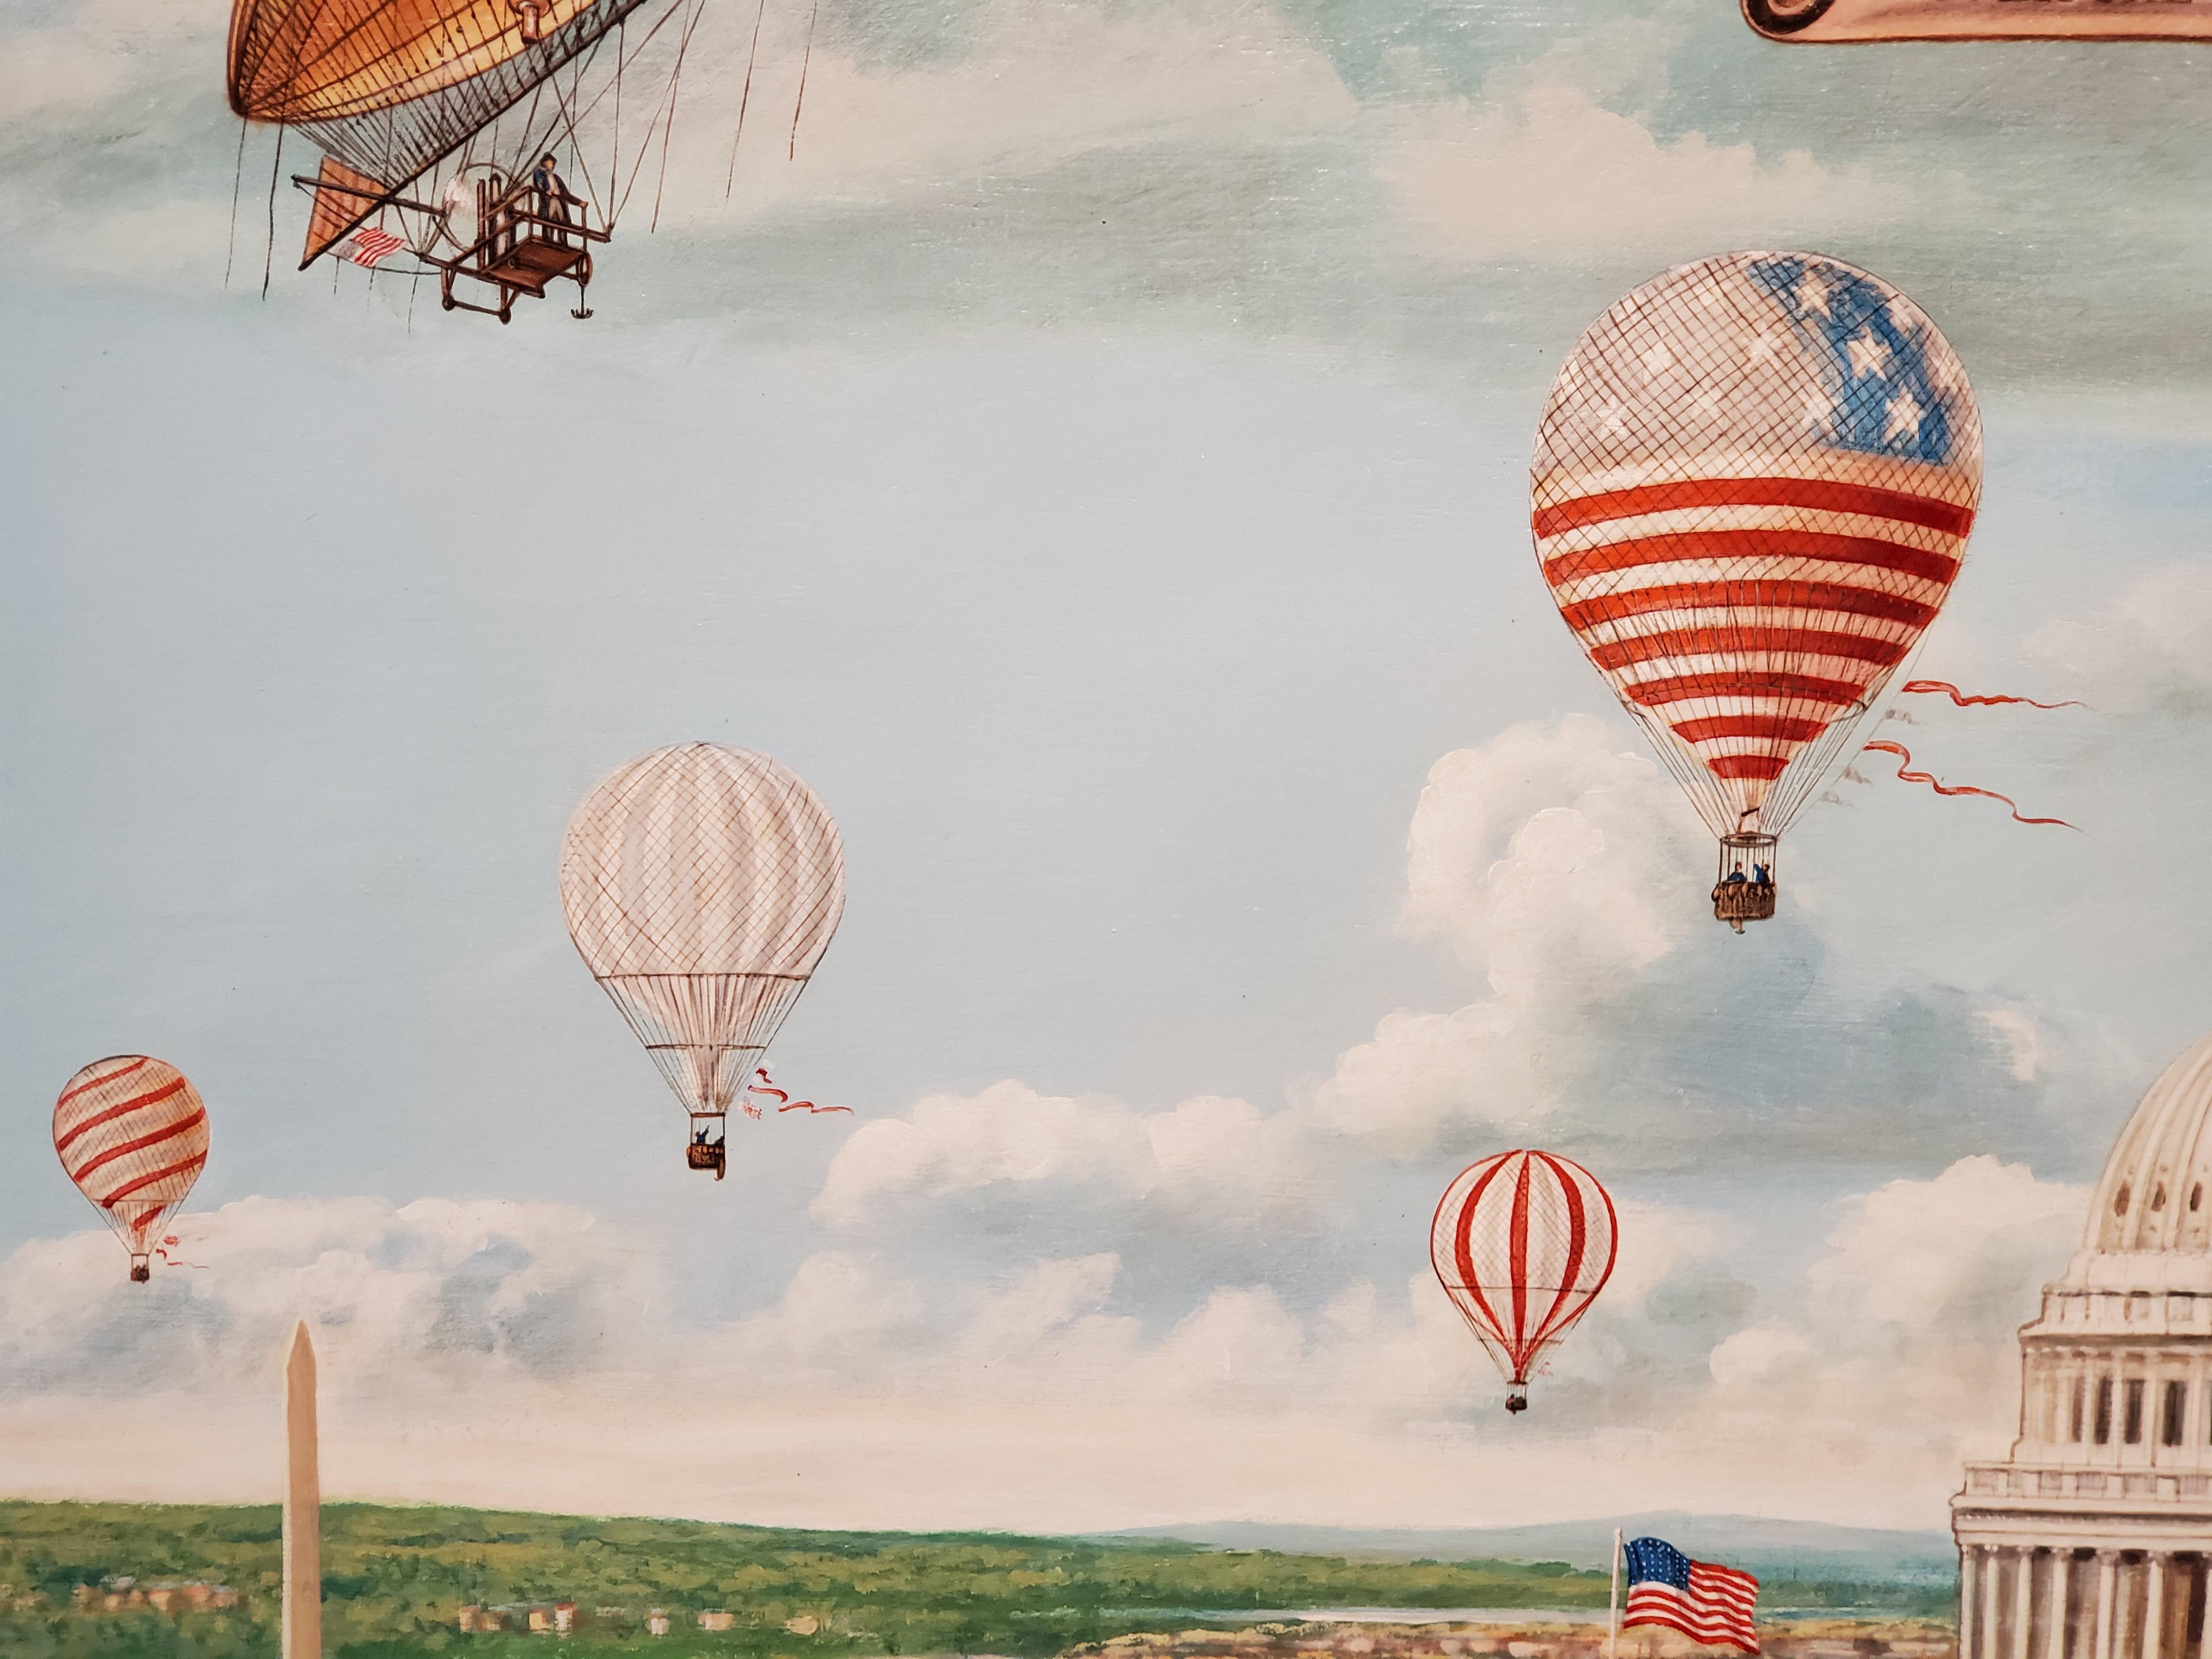 Grand 19th century Aeronautical Spectacular Over the US Capitol by Morris Flight 14